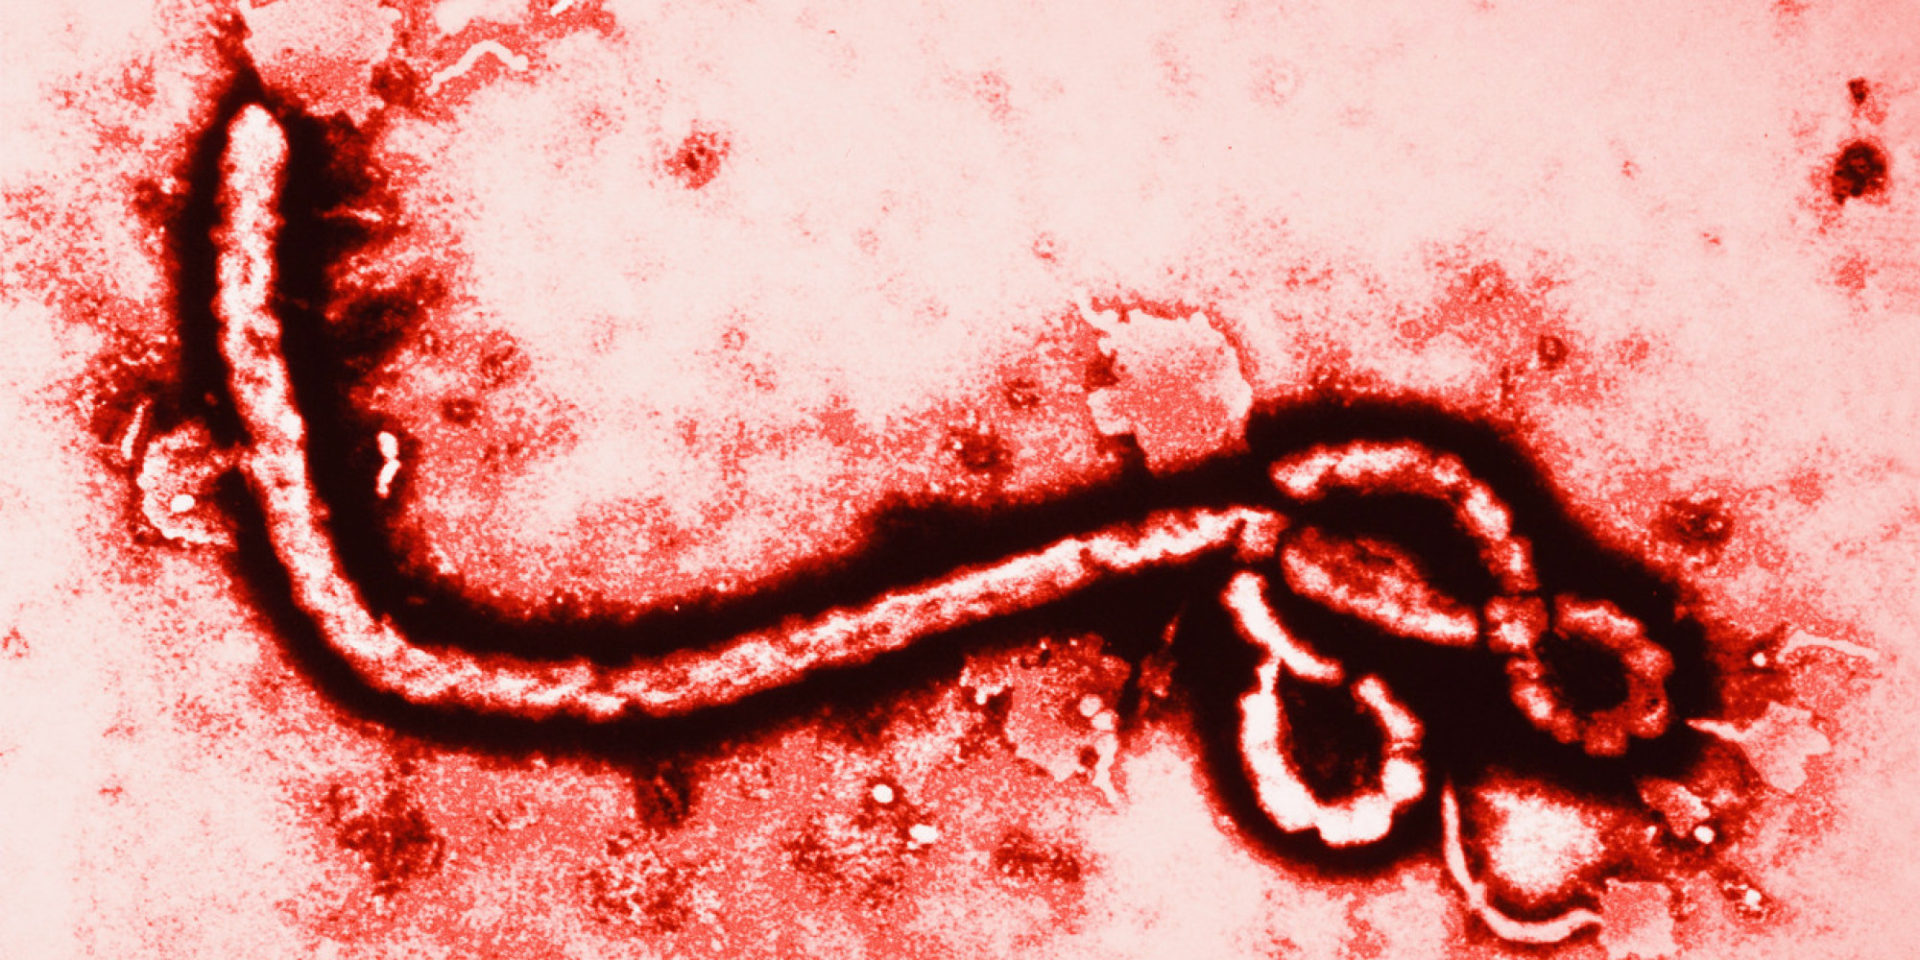 New Yorkers Least Concerned About Ebola